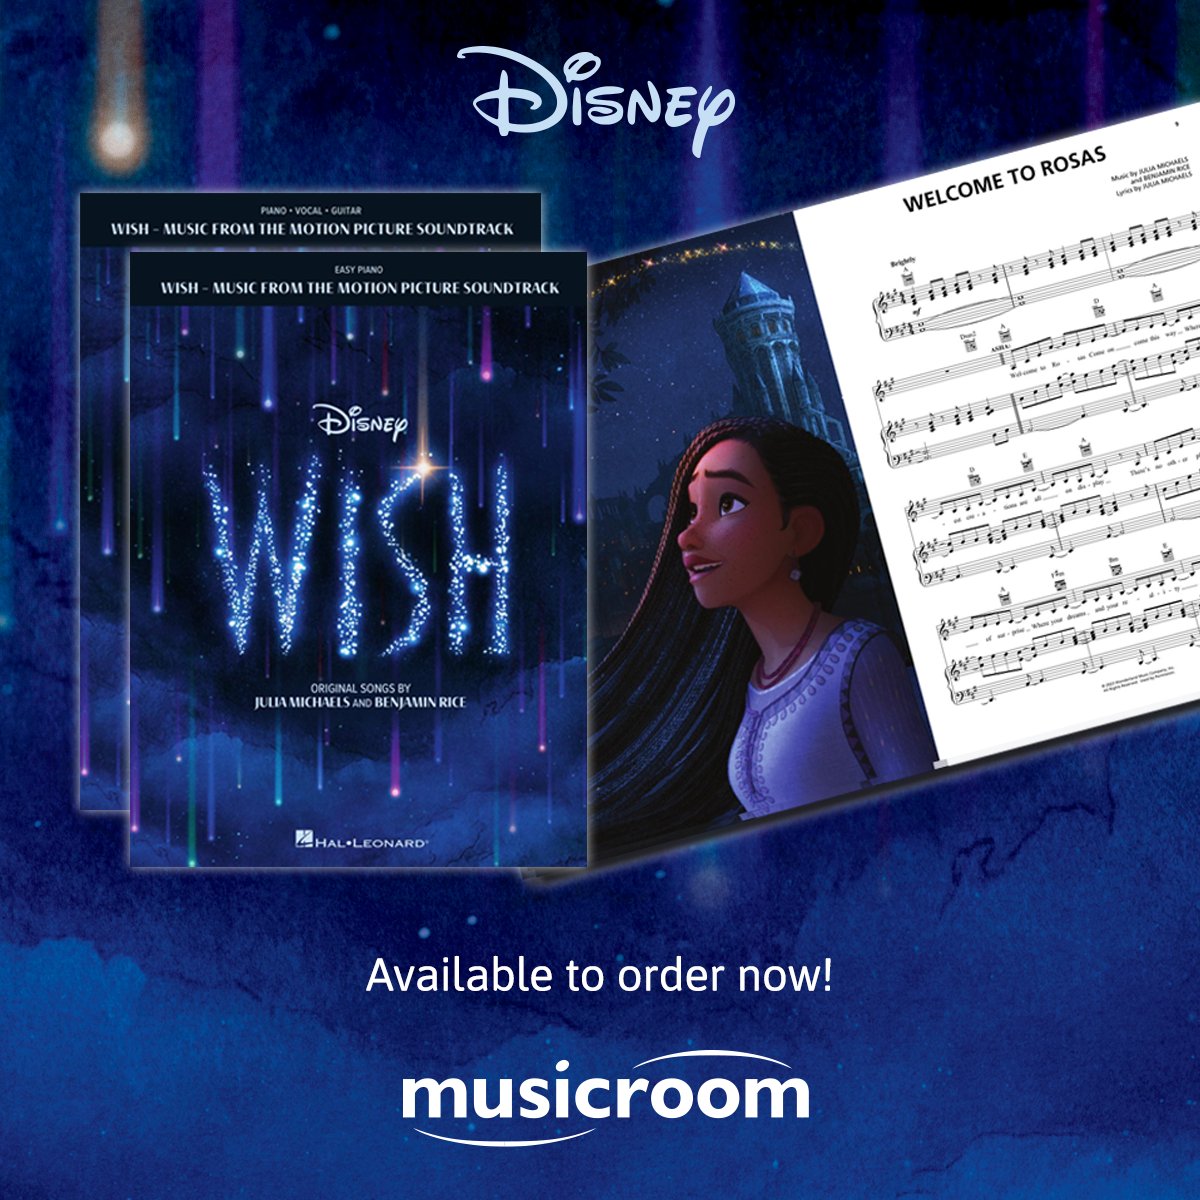 The latest animated musical film from @Disney, Wish, was released in cinemas this past November. The official souvenir songbooks are now available to order, featuring full-colour scenes and seven songs from the soundtrack. Get your copy here: musicroom.com/disney-wish/